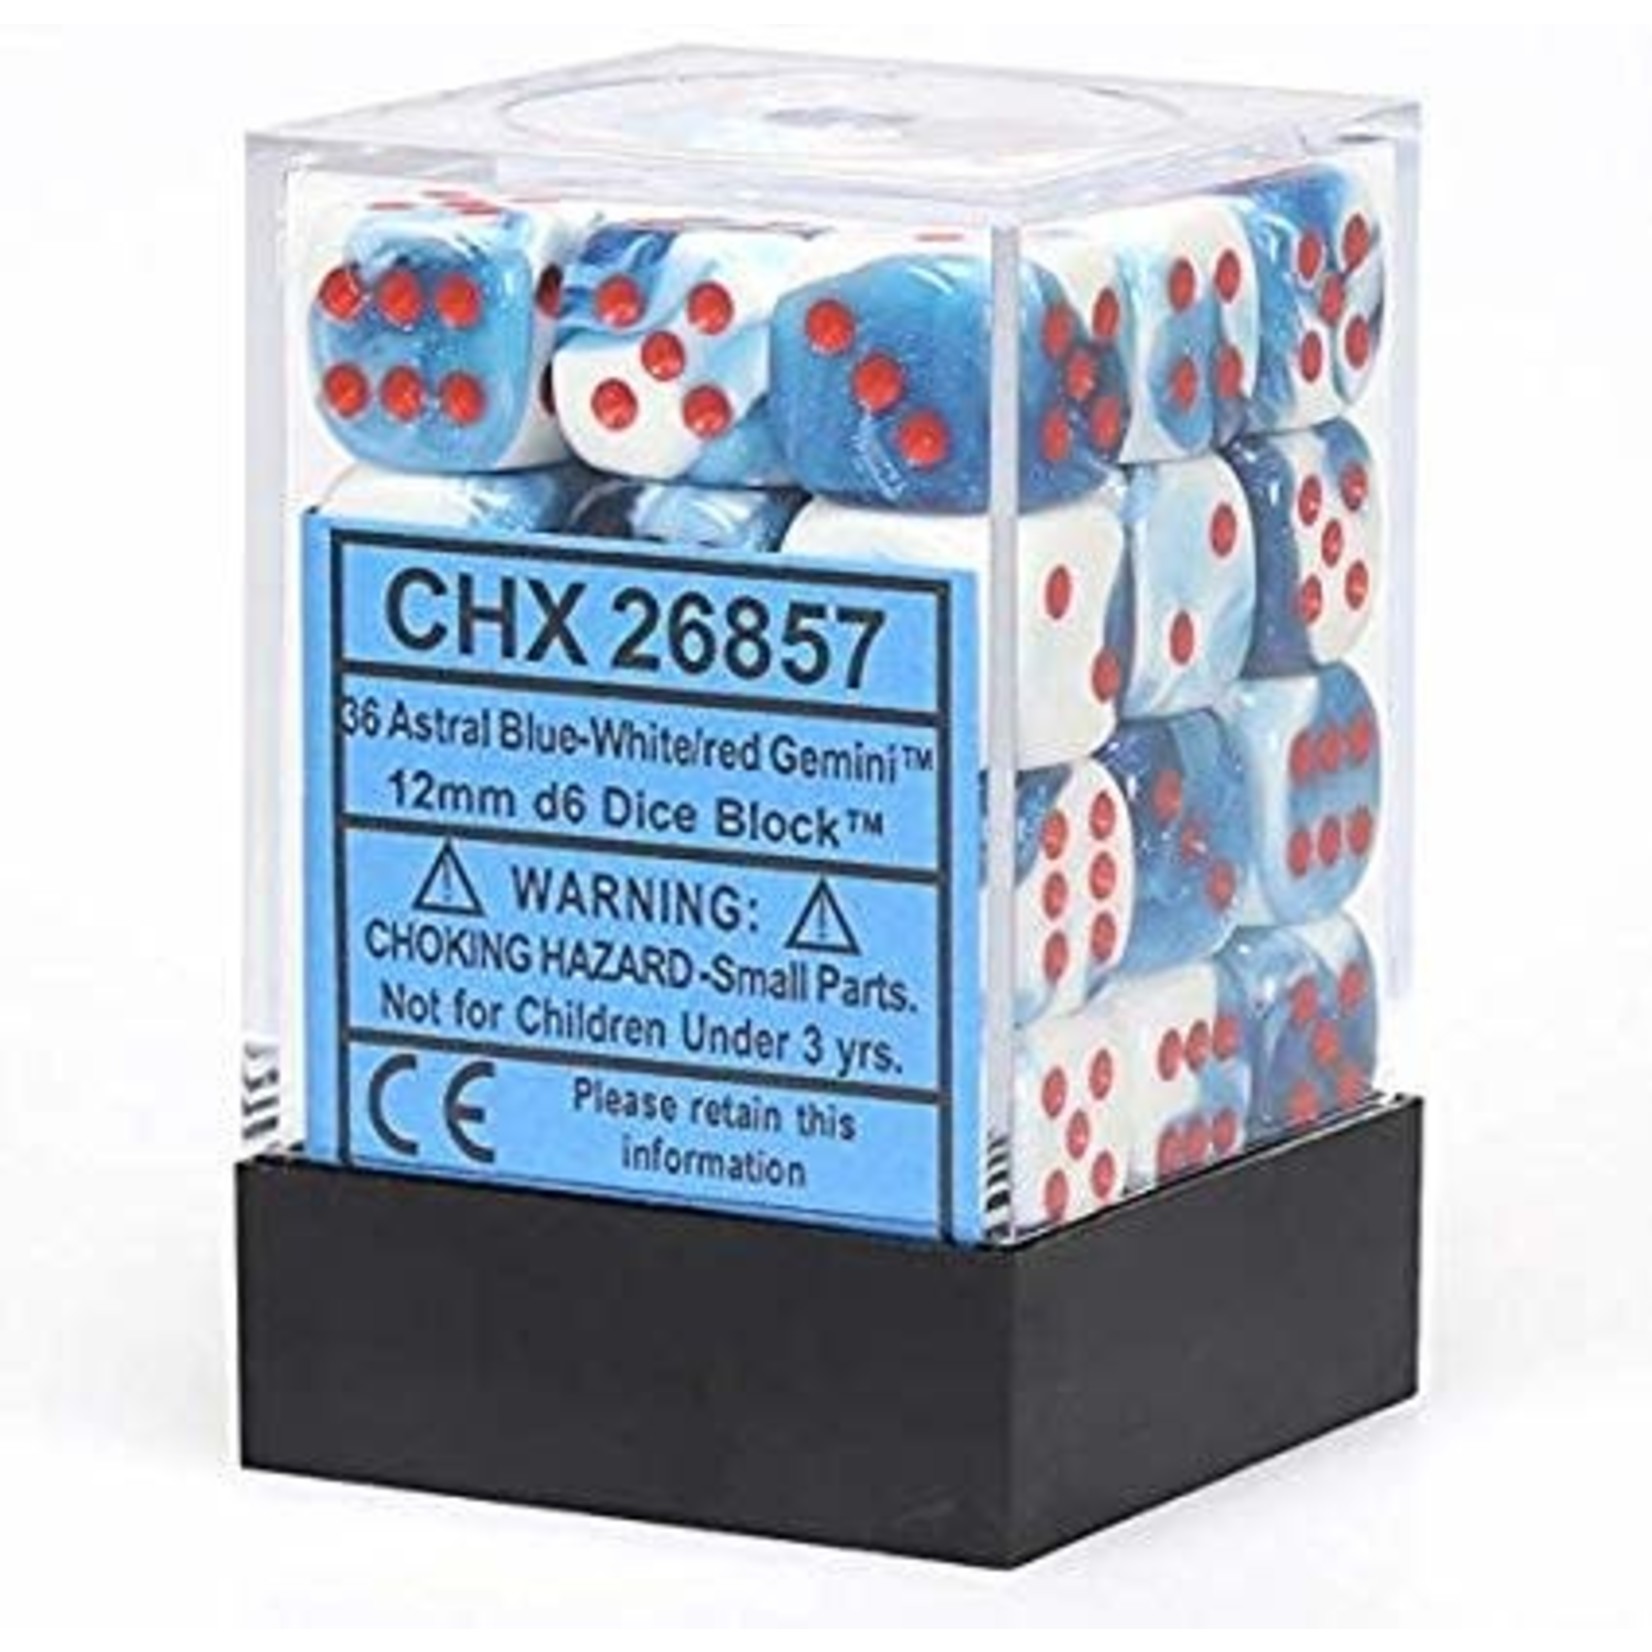 Chessex Gemini Astral Blue White w/red 12mm d6 dice (36)